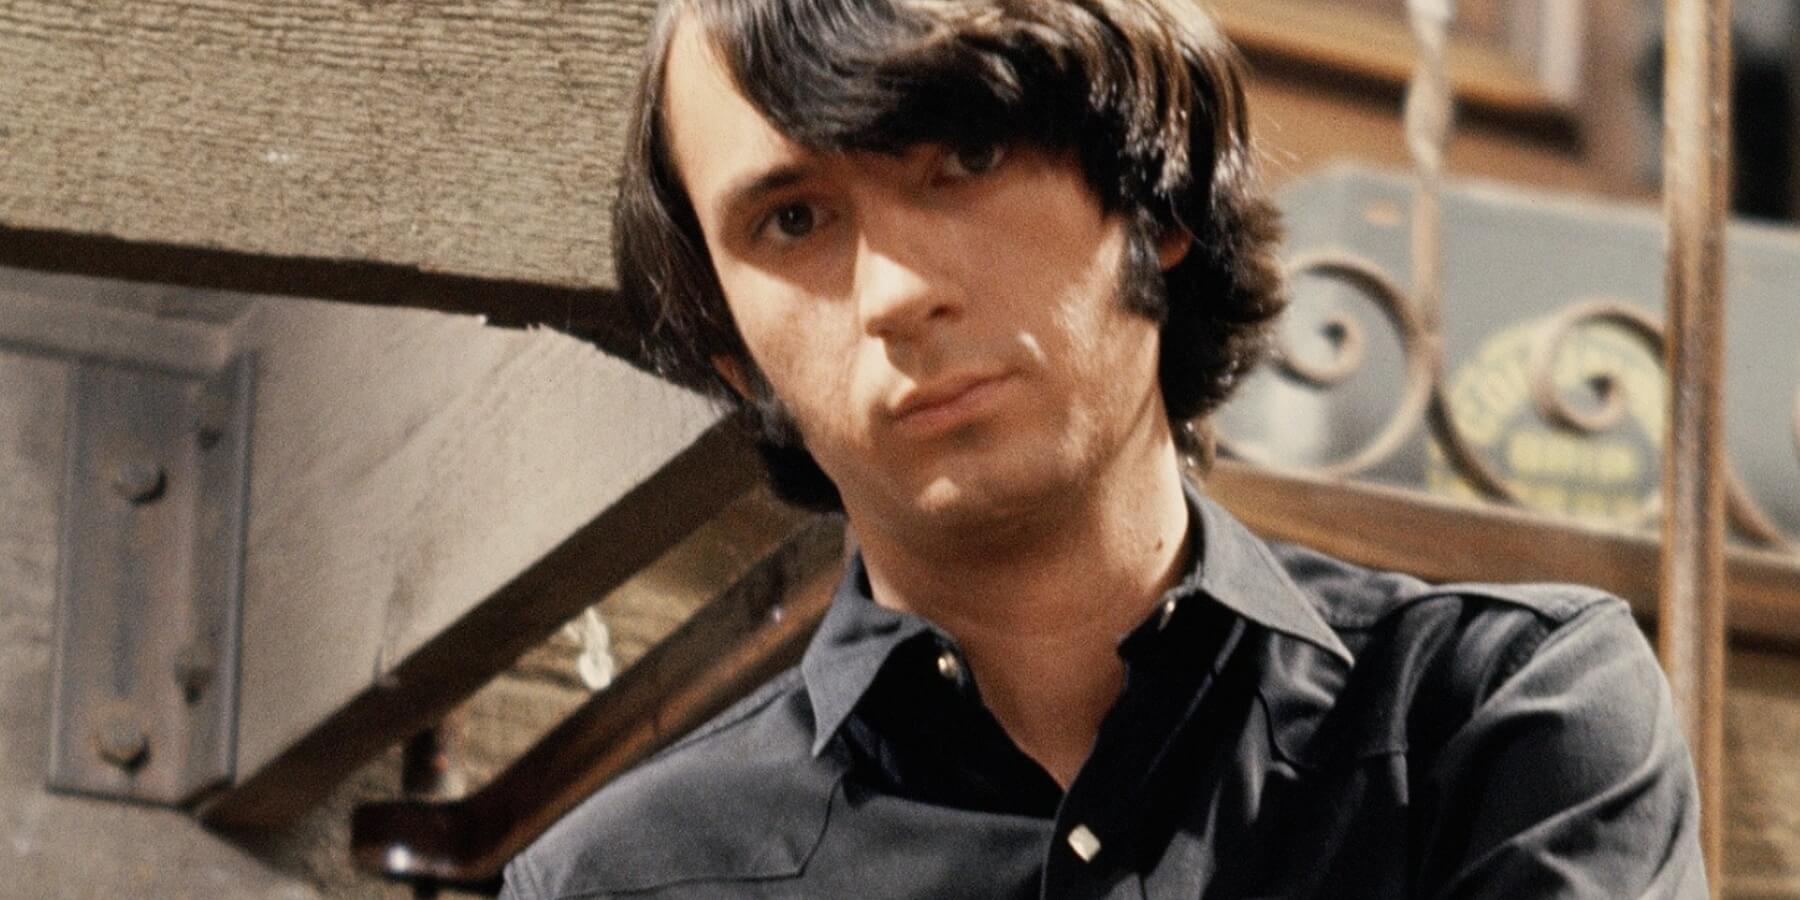 Mike Nesmith on the set of 'The Monkees' in 1967.